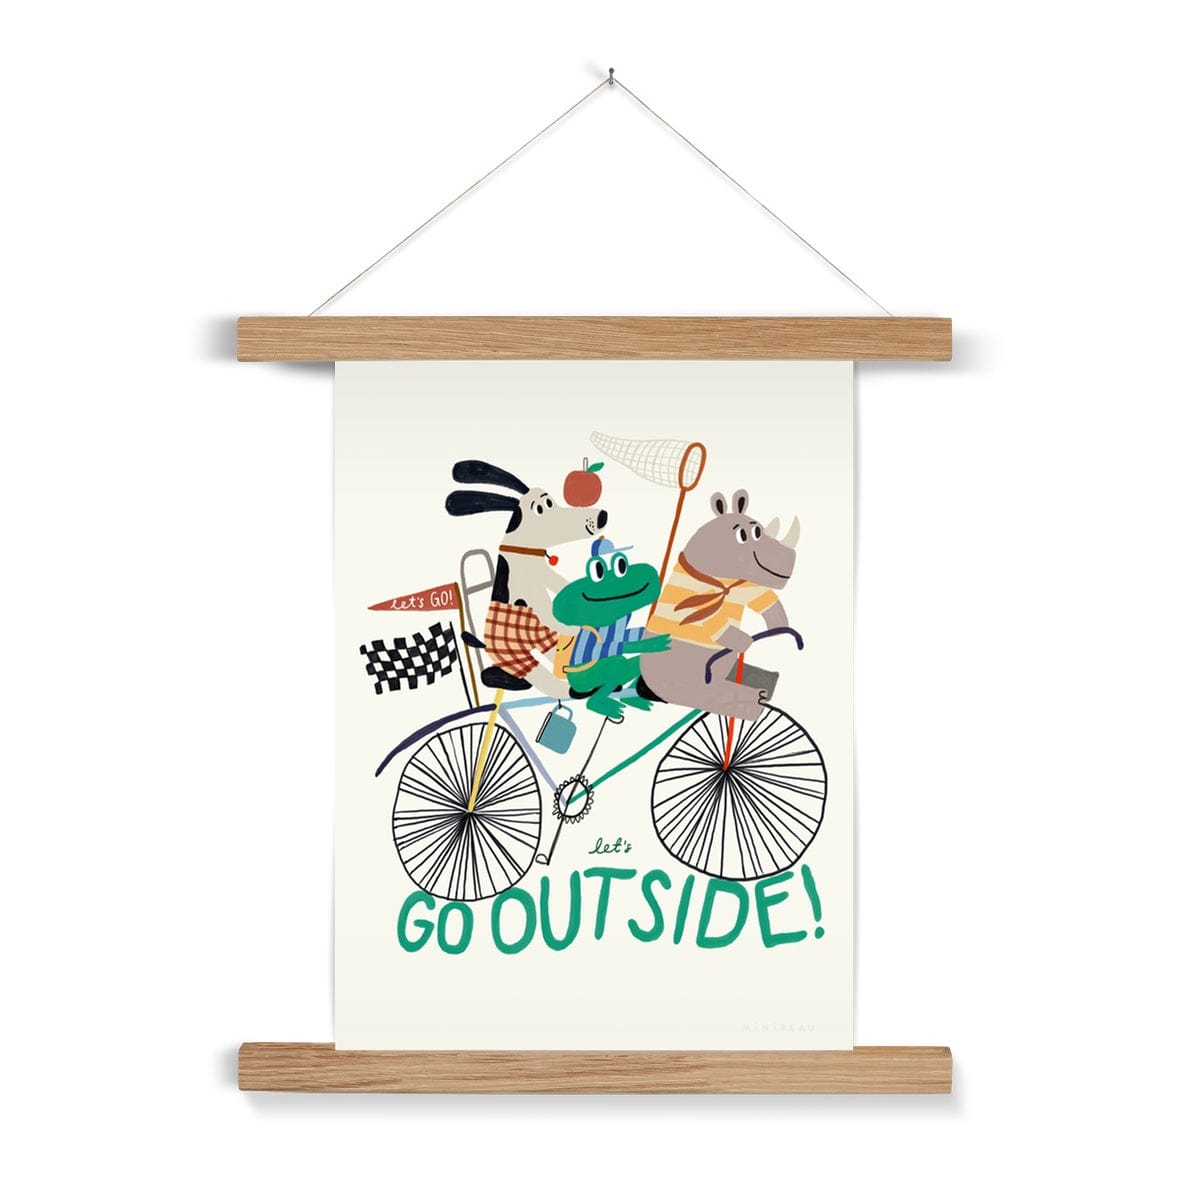 A photo of our let's go outside art print on a white background. Featuring a Rhino in a yellow striped top at the front, a frog in a blue striped top and matching baseball cap holding a net in the middle, and a dog in chequered shorts at the back with a red apple balanced on his nose all on a multi coloured bike above the words let's go outside. On a cream background. In a natural wooden hanger